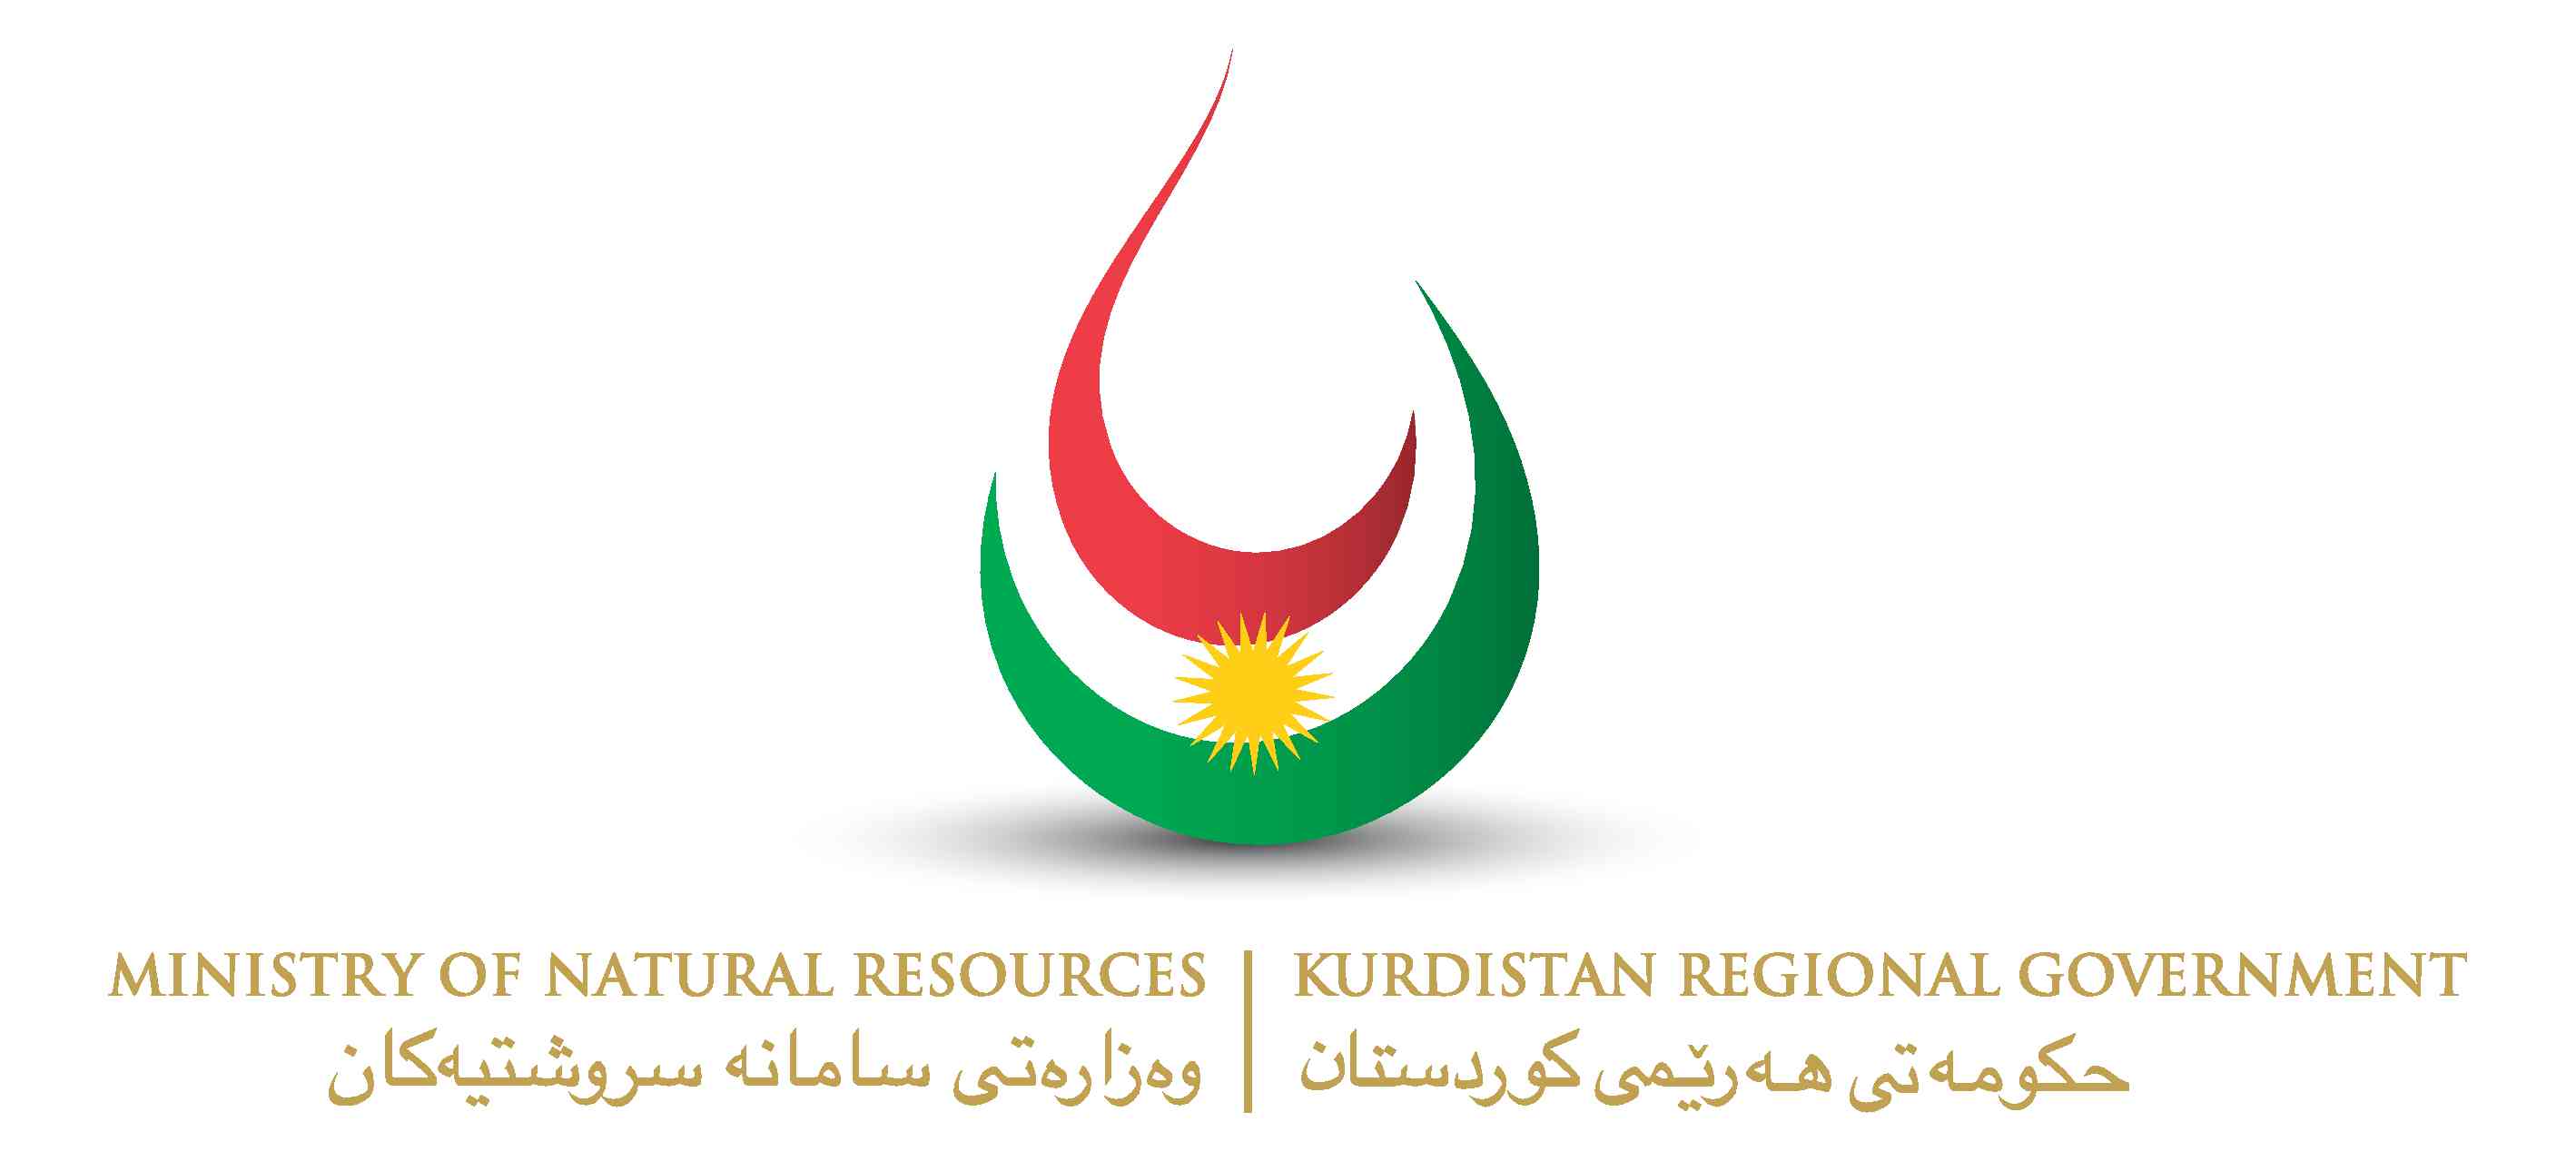 Statement by the ministry of natural resources of KRG